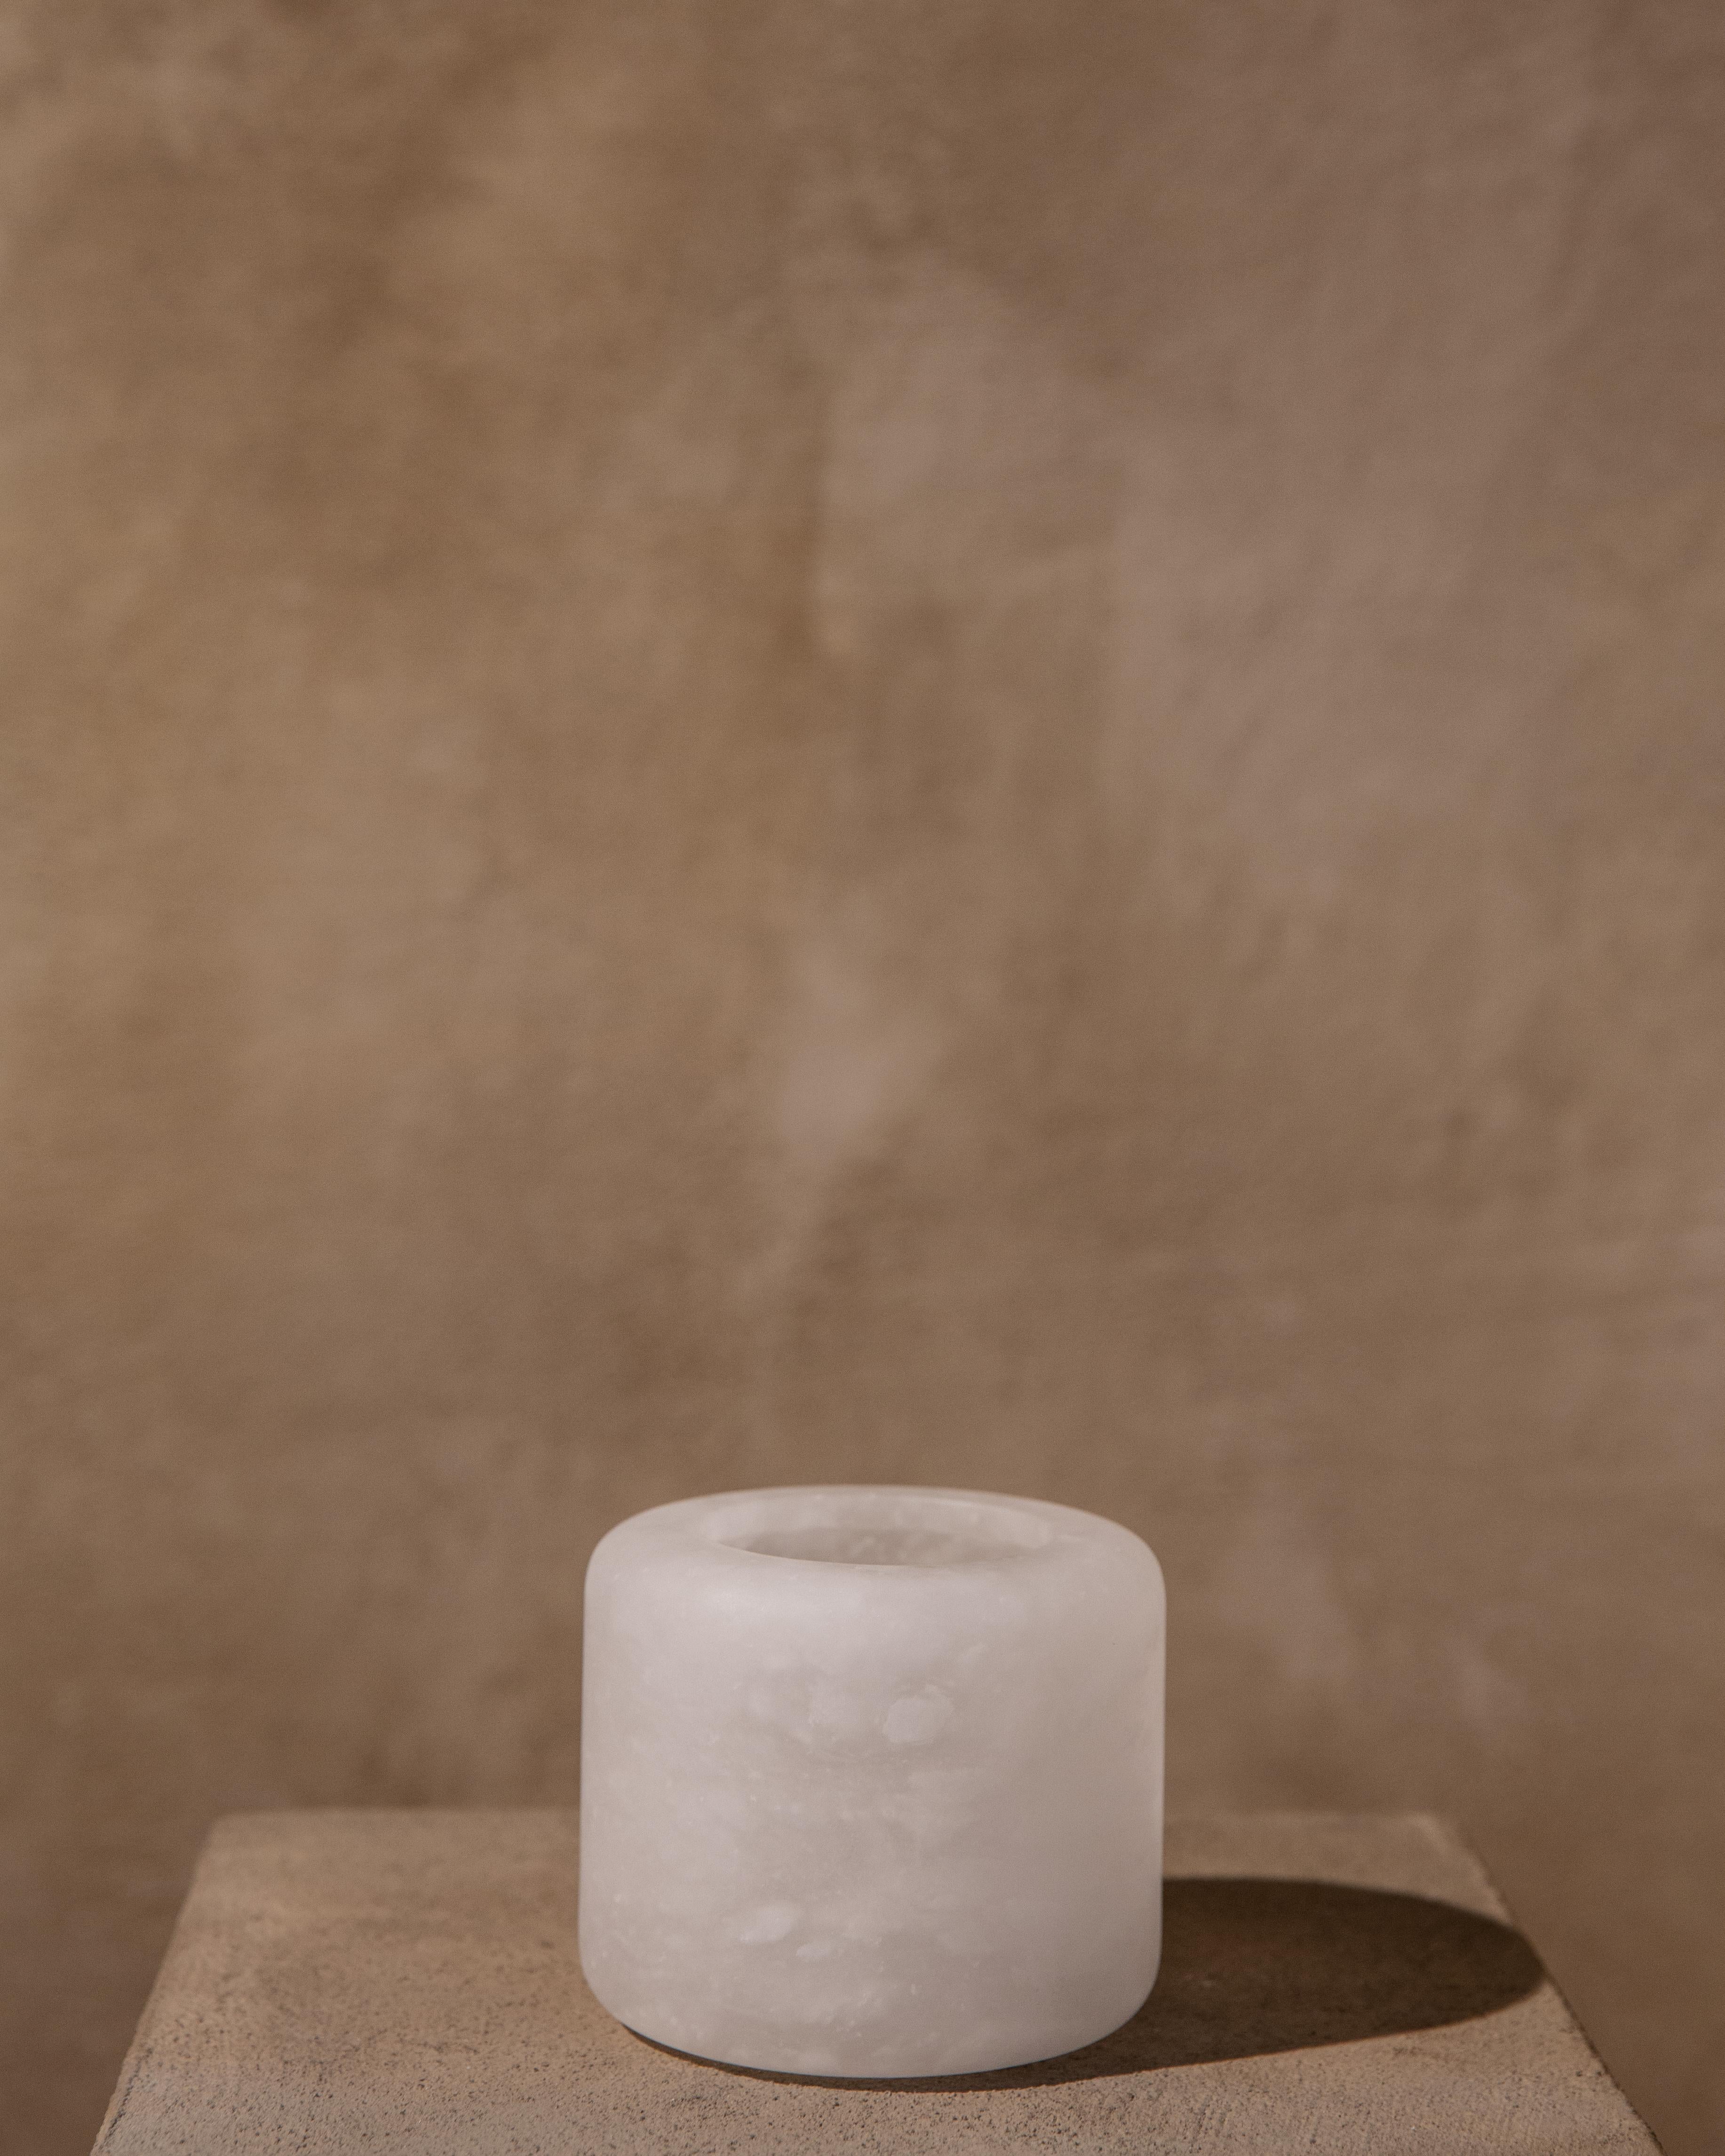 Luri candle holder by Karu
Dimensions: D 10 x H 8 cm
Materials: alabaster.

Contemporary Vessels inspired by Etruscan Antiquity.
Handcrafted in the hills of Tuscany.

Award-winning design firm Karu debuts its latest limited edition home